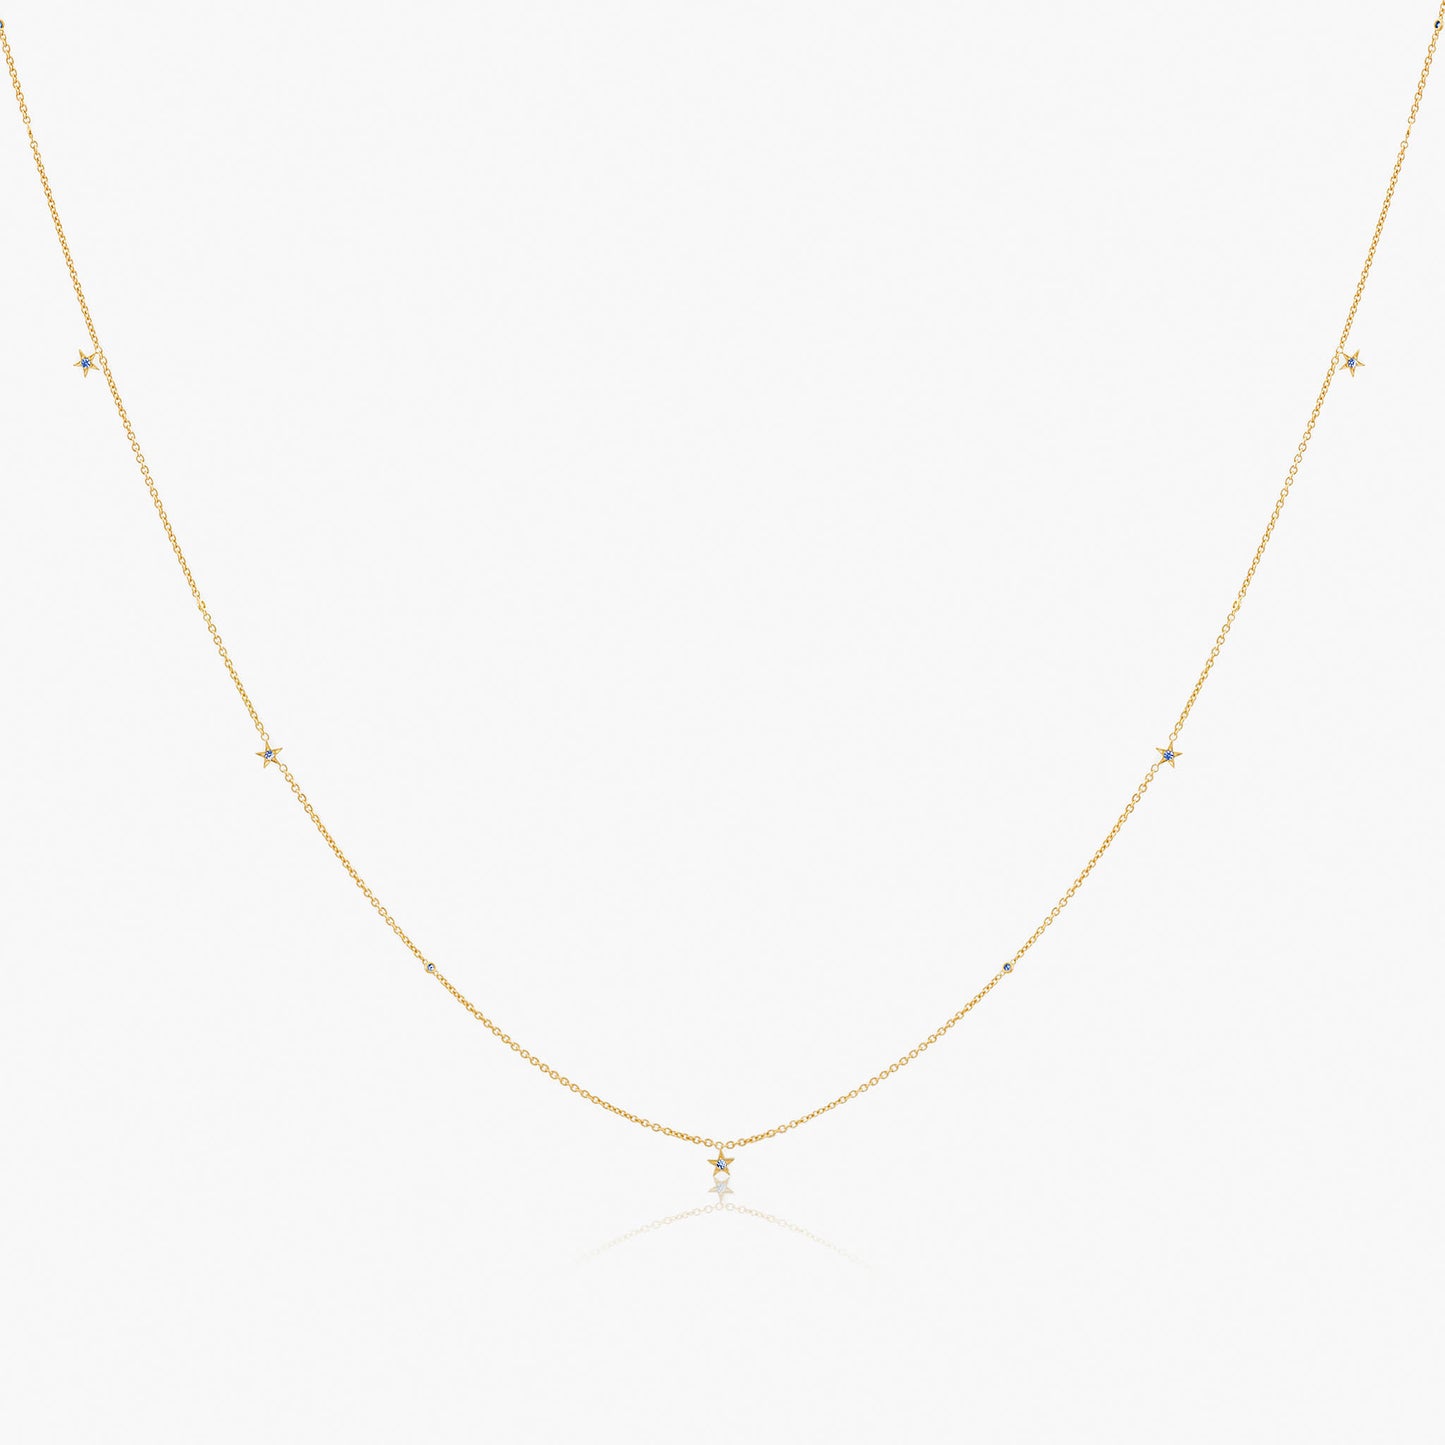 Guiding Star 18ct Yellow Gold & Sapphire Necklace, 105cm